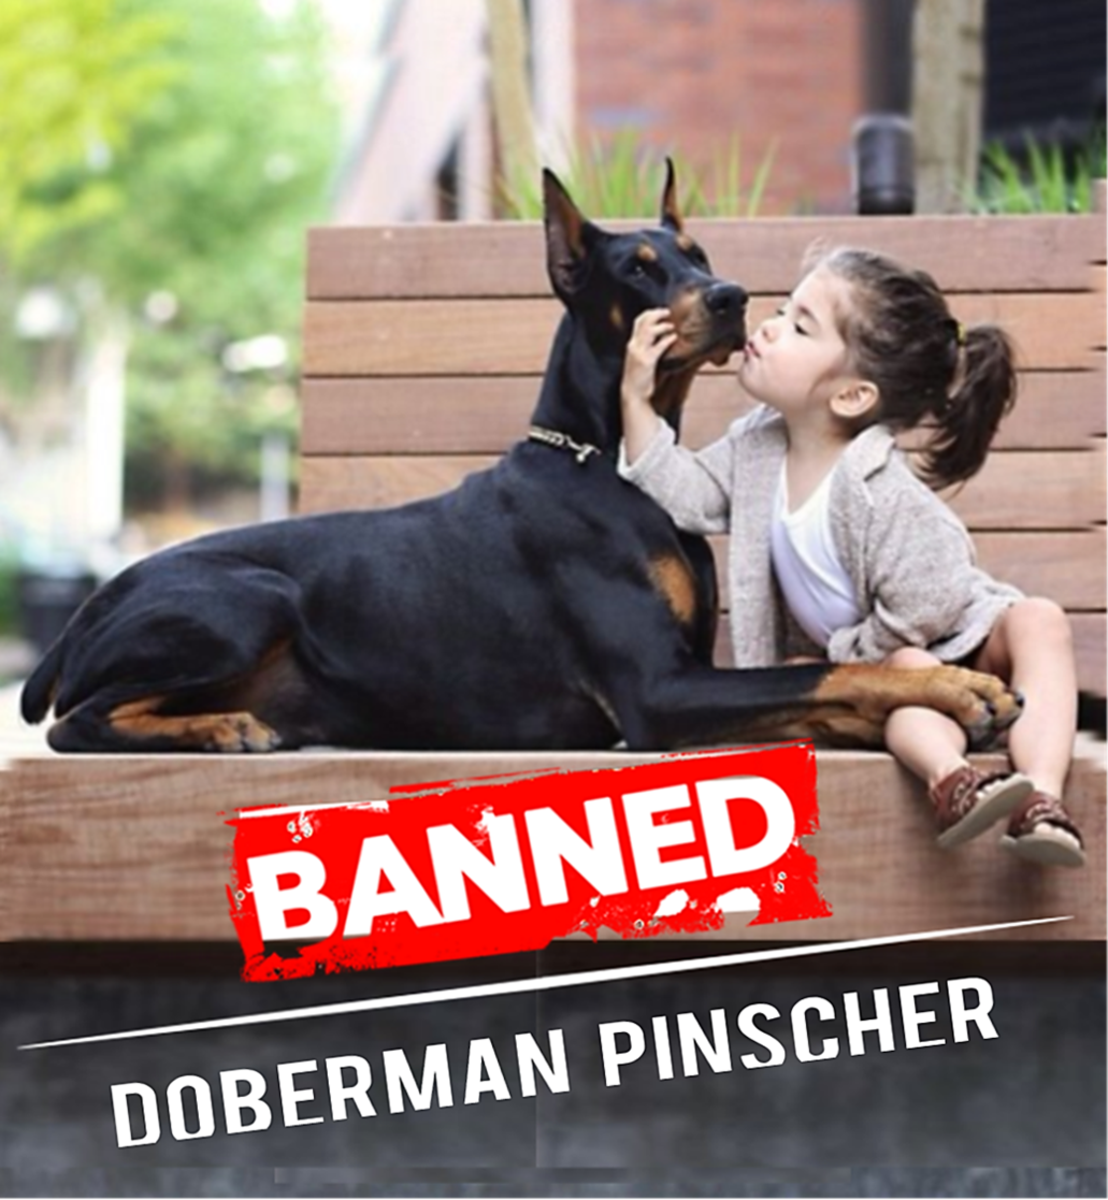 11 Countries Where Doberman Pinschers Are Banned or Restricted